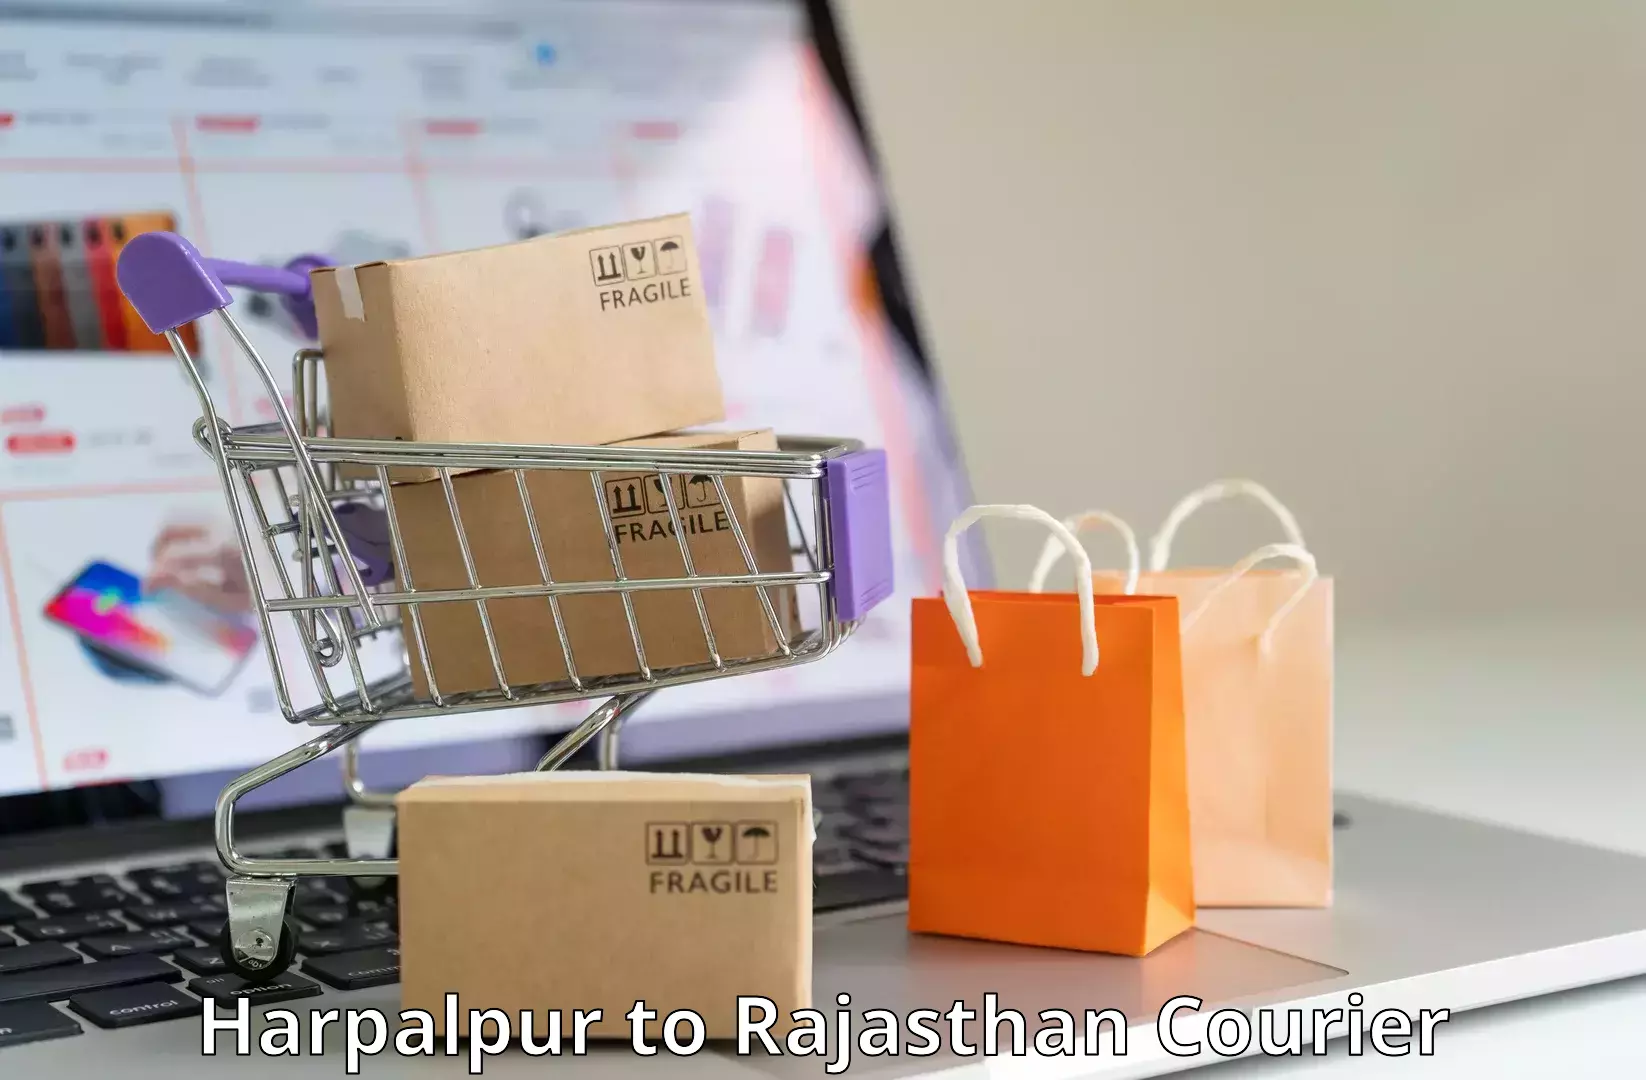 Same-day delivery solutions Harpalpur to Kumbhalgarh